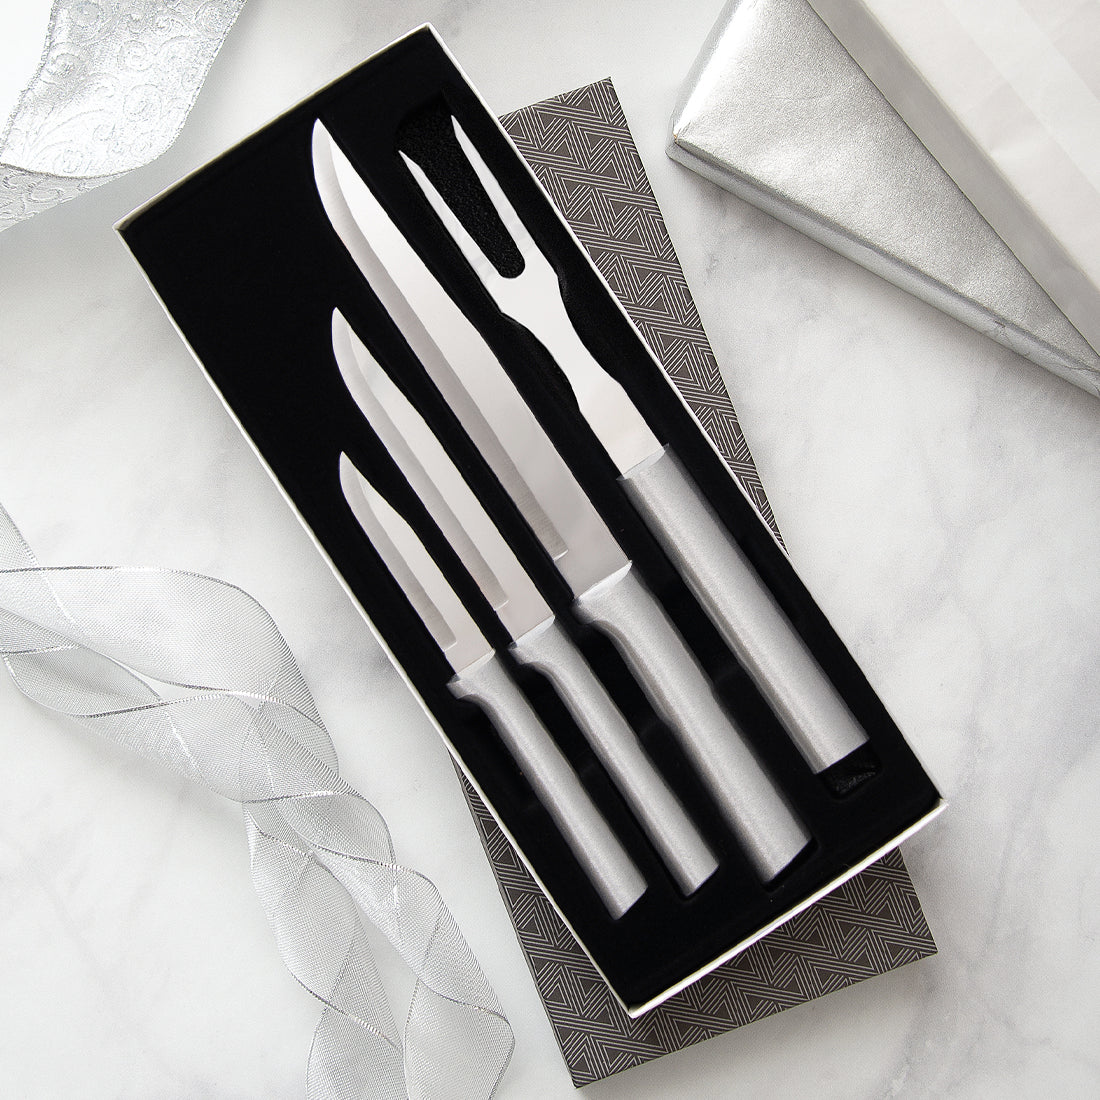 Rada Cutlery Prepare Then Carve Gift Set with silver handles.